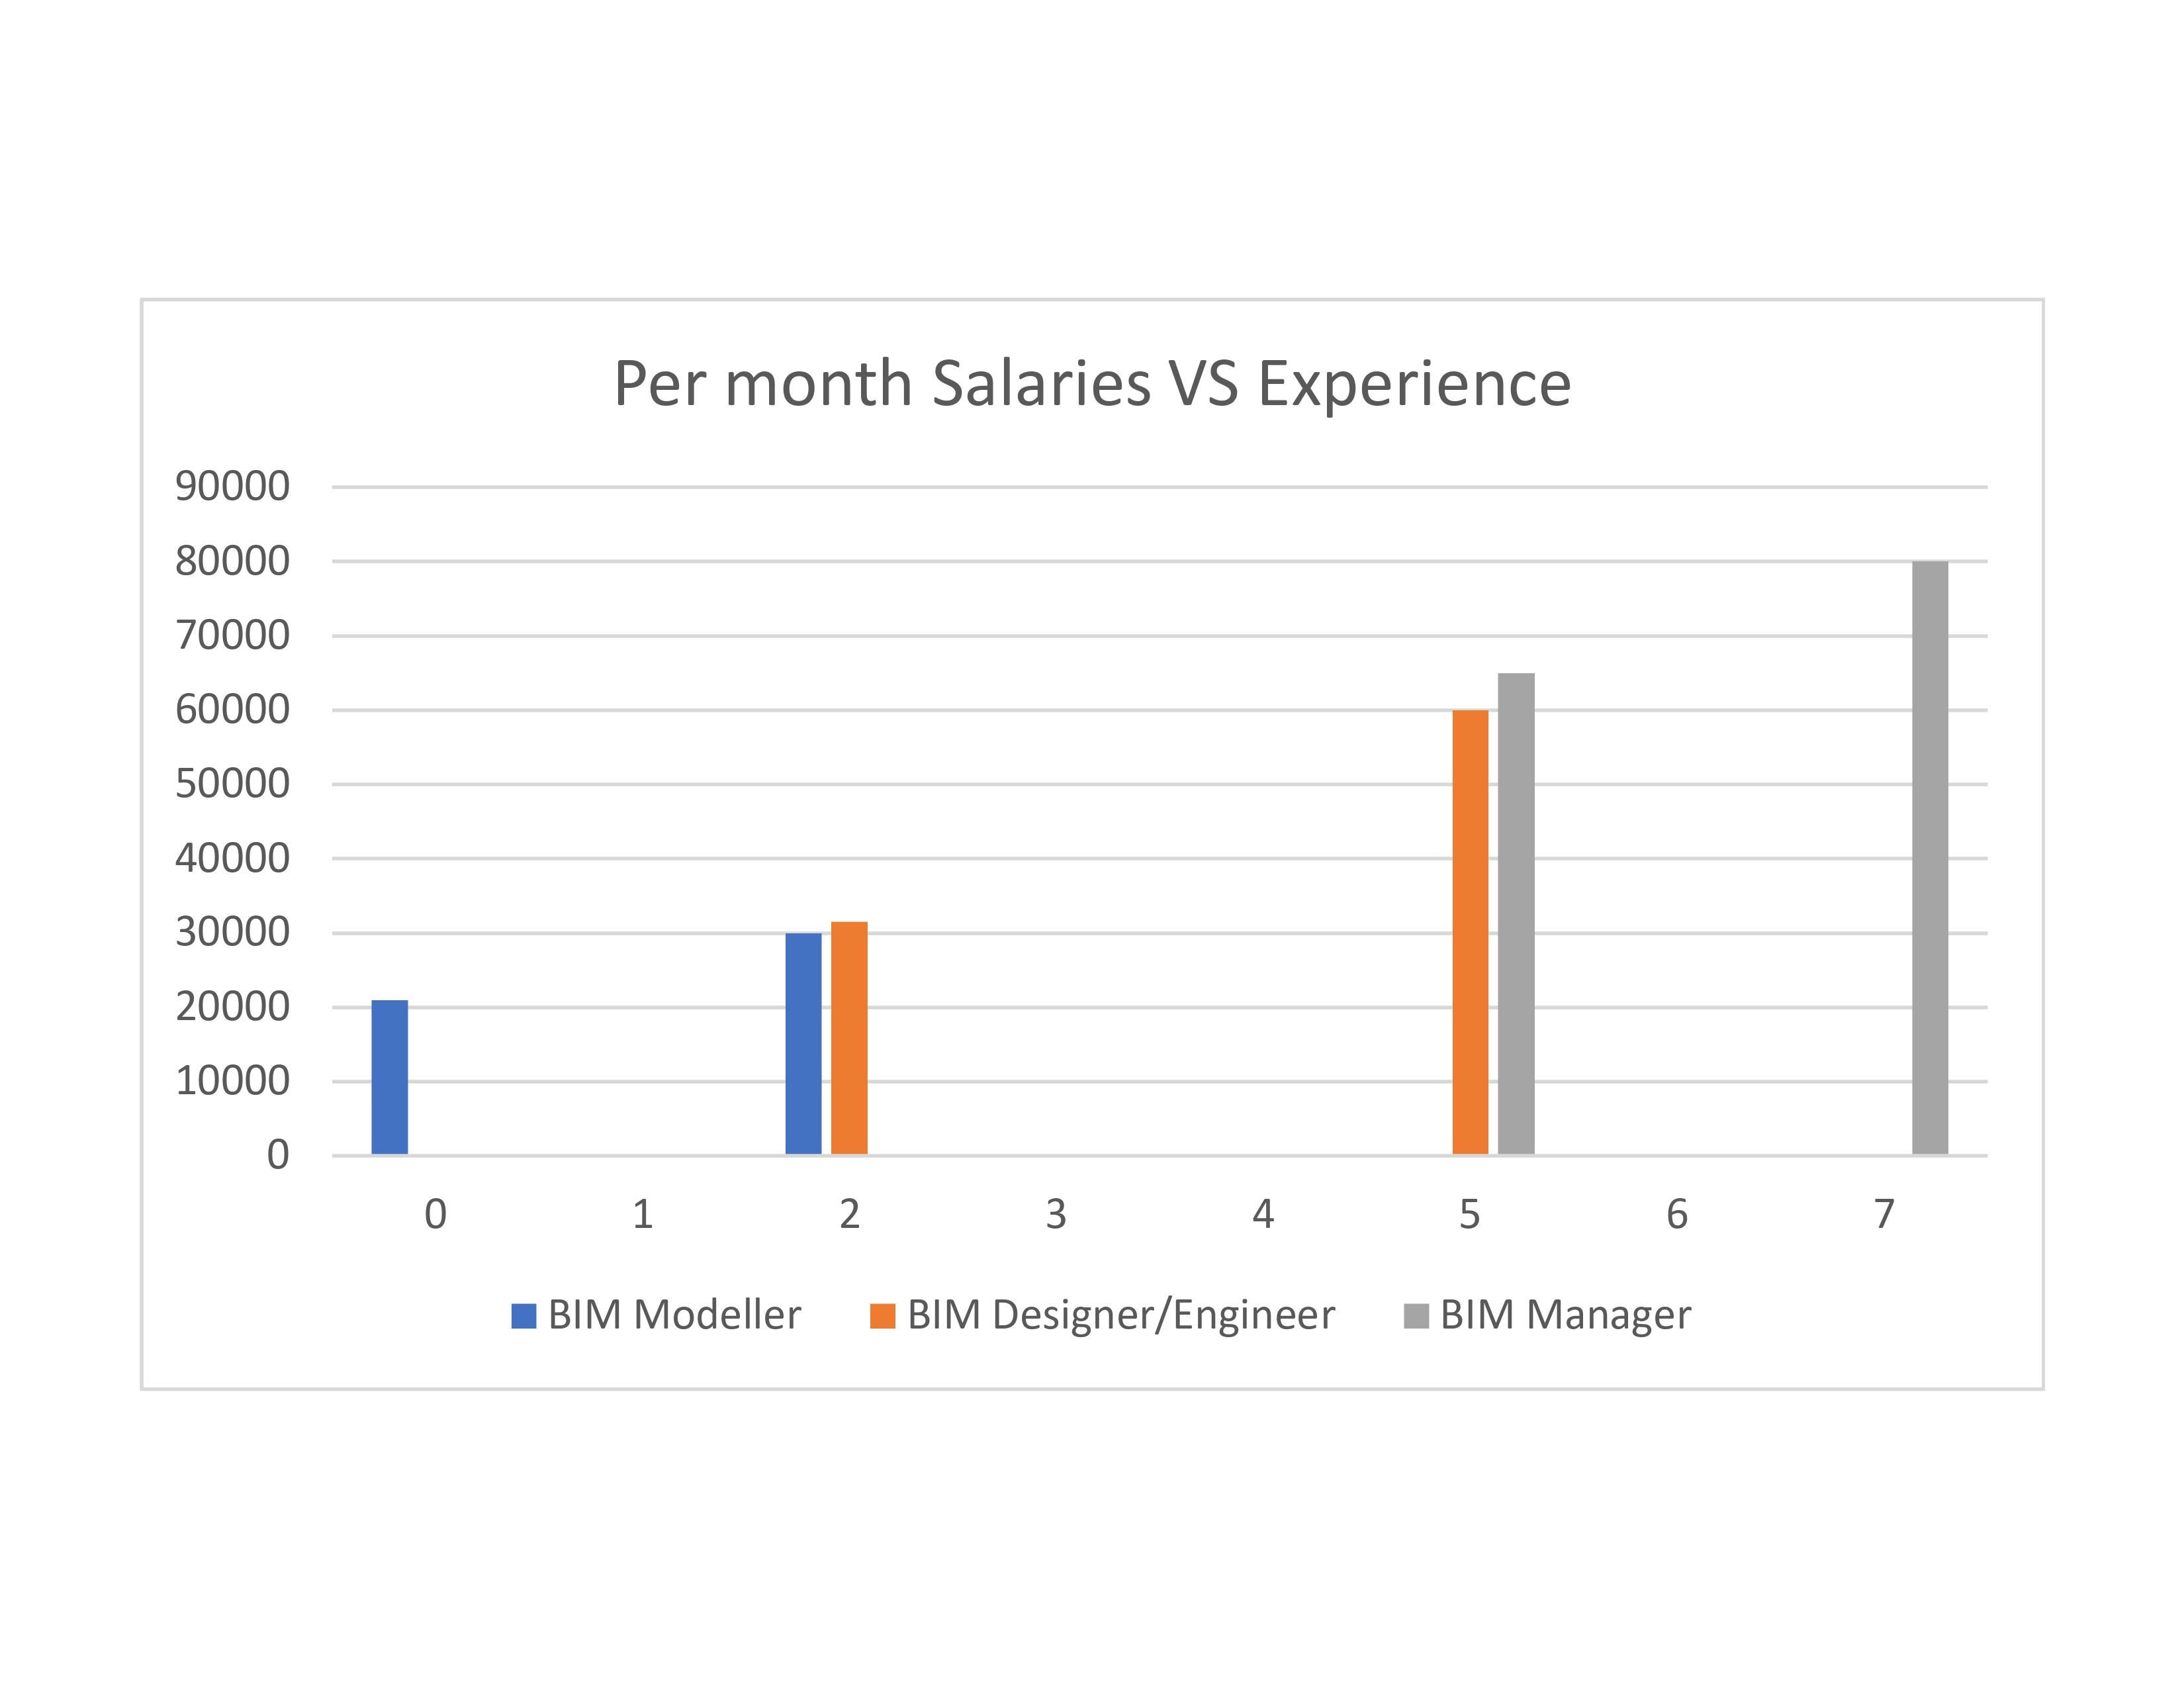 A bar graph comparing monthly salaries against years of experience for three different BIM professions